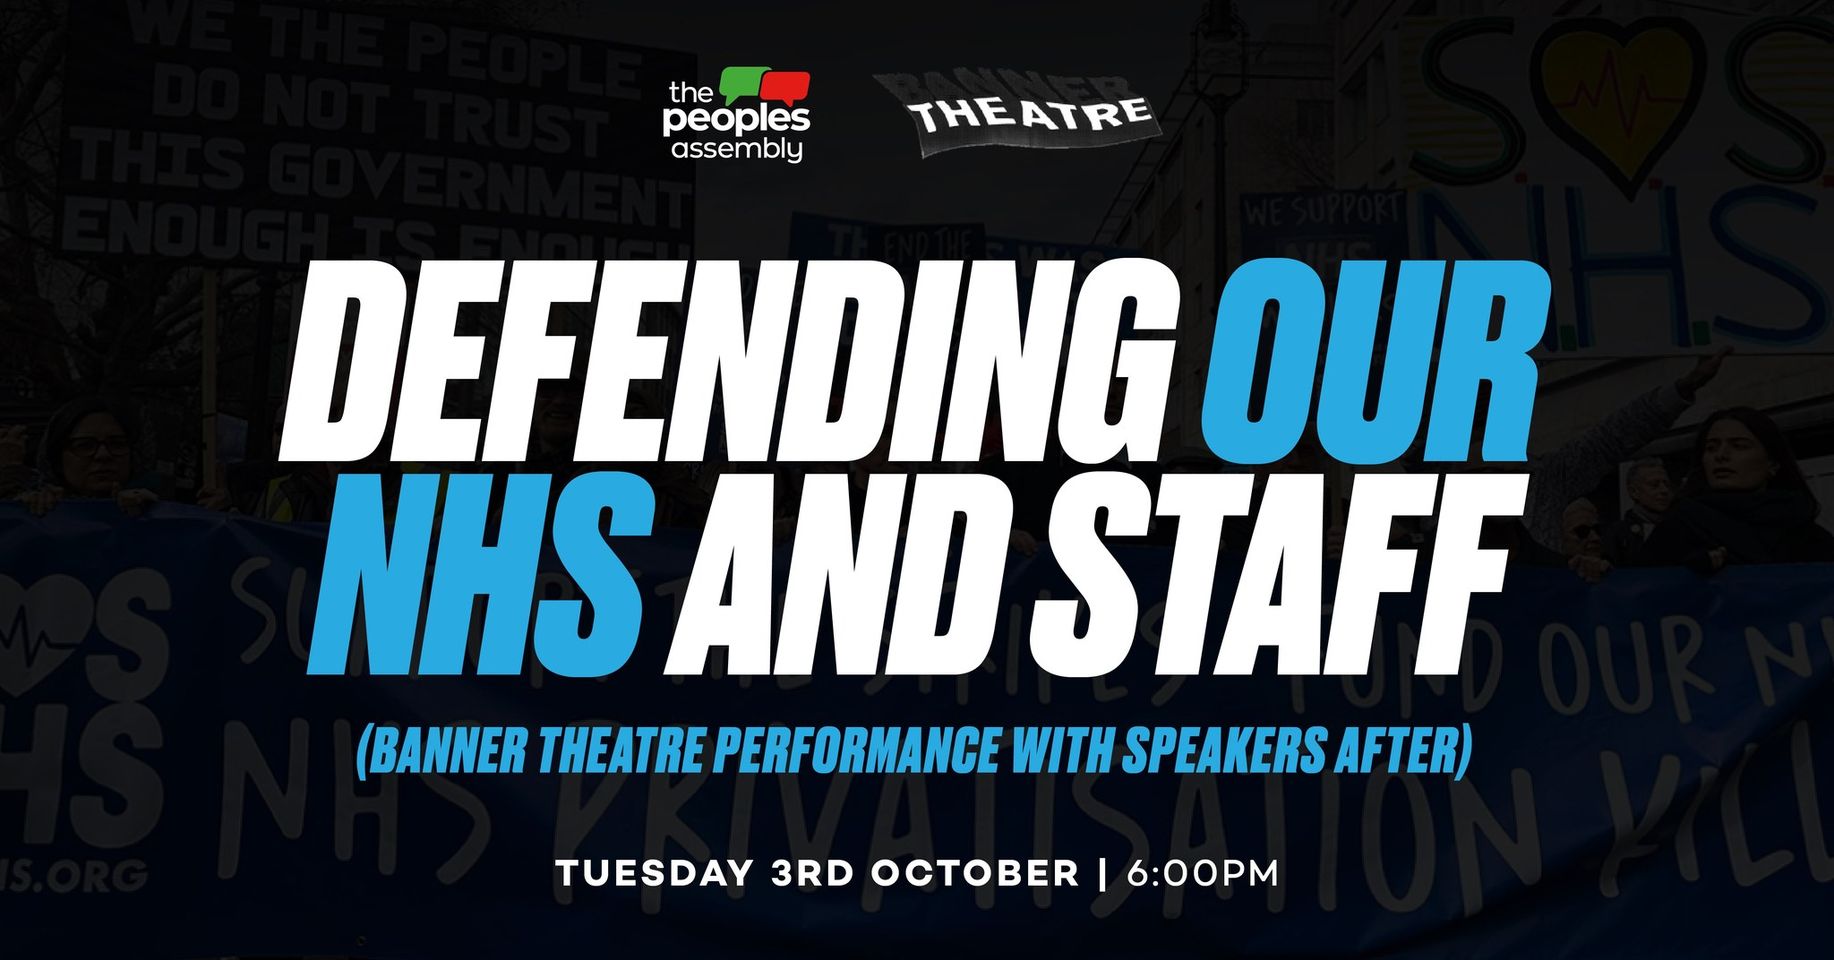 Defending our NHS and staff (Banner Theatre performance with speakers after). Tuesday 3rd Oct 6pm.